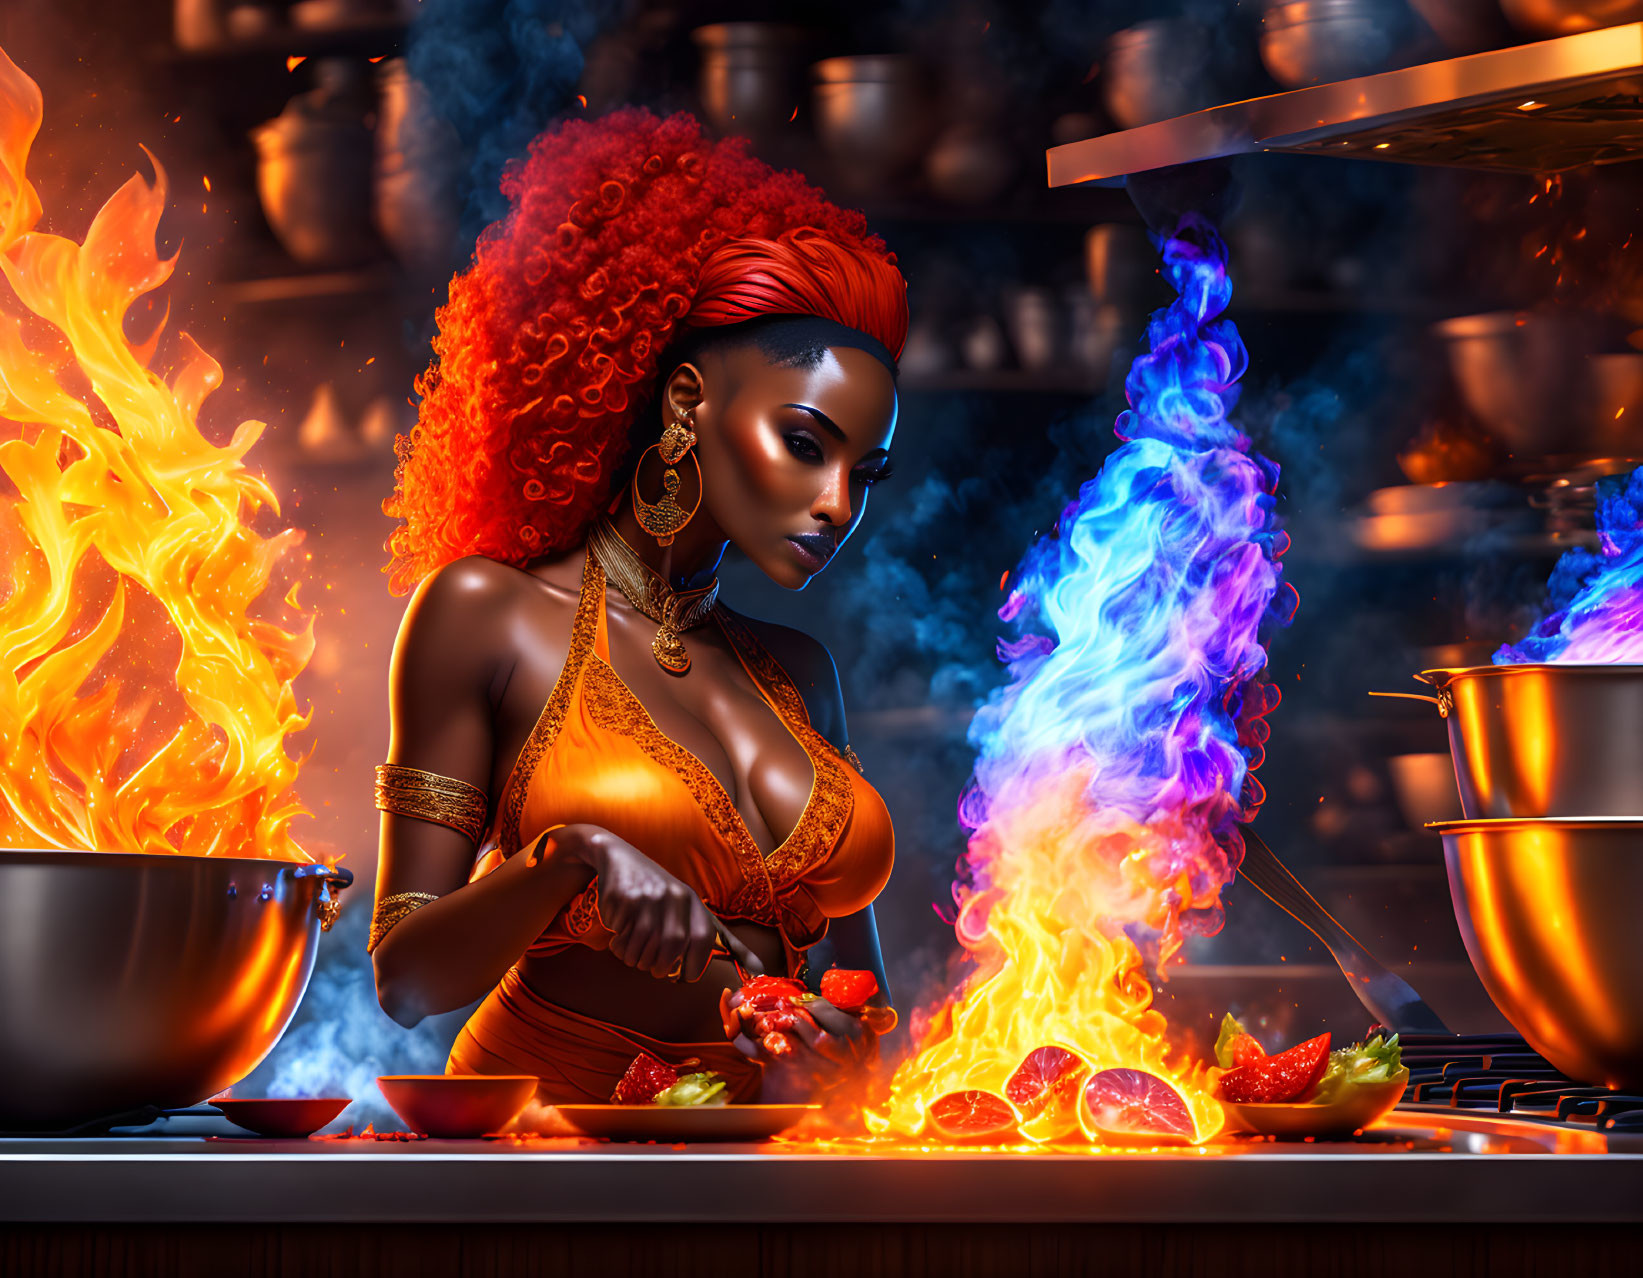 Vibrant illustration of woman cooking with red hair